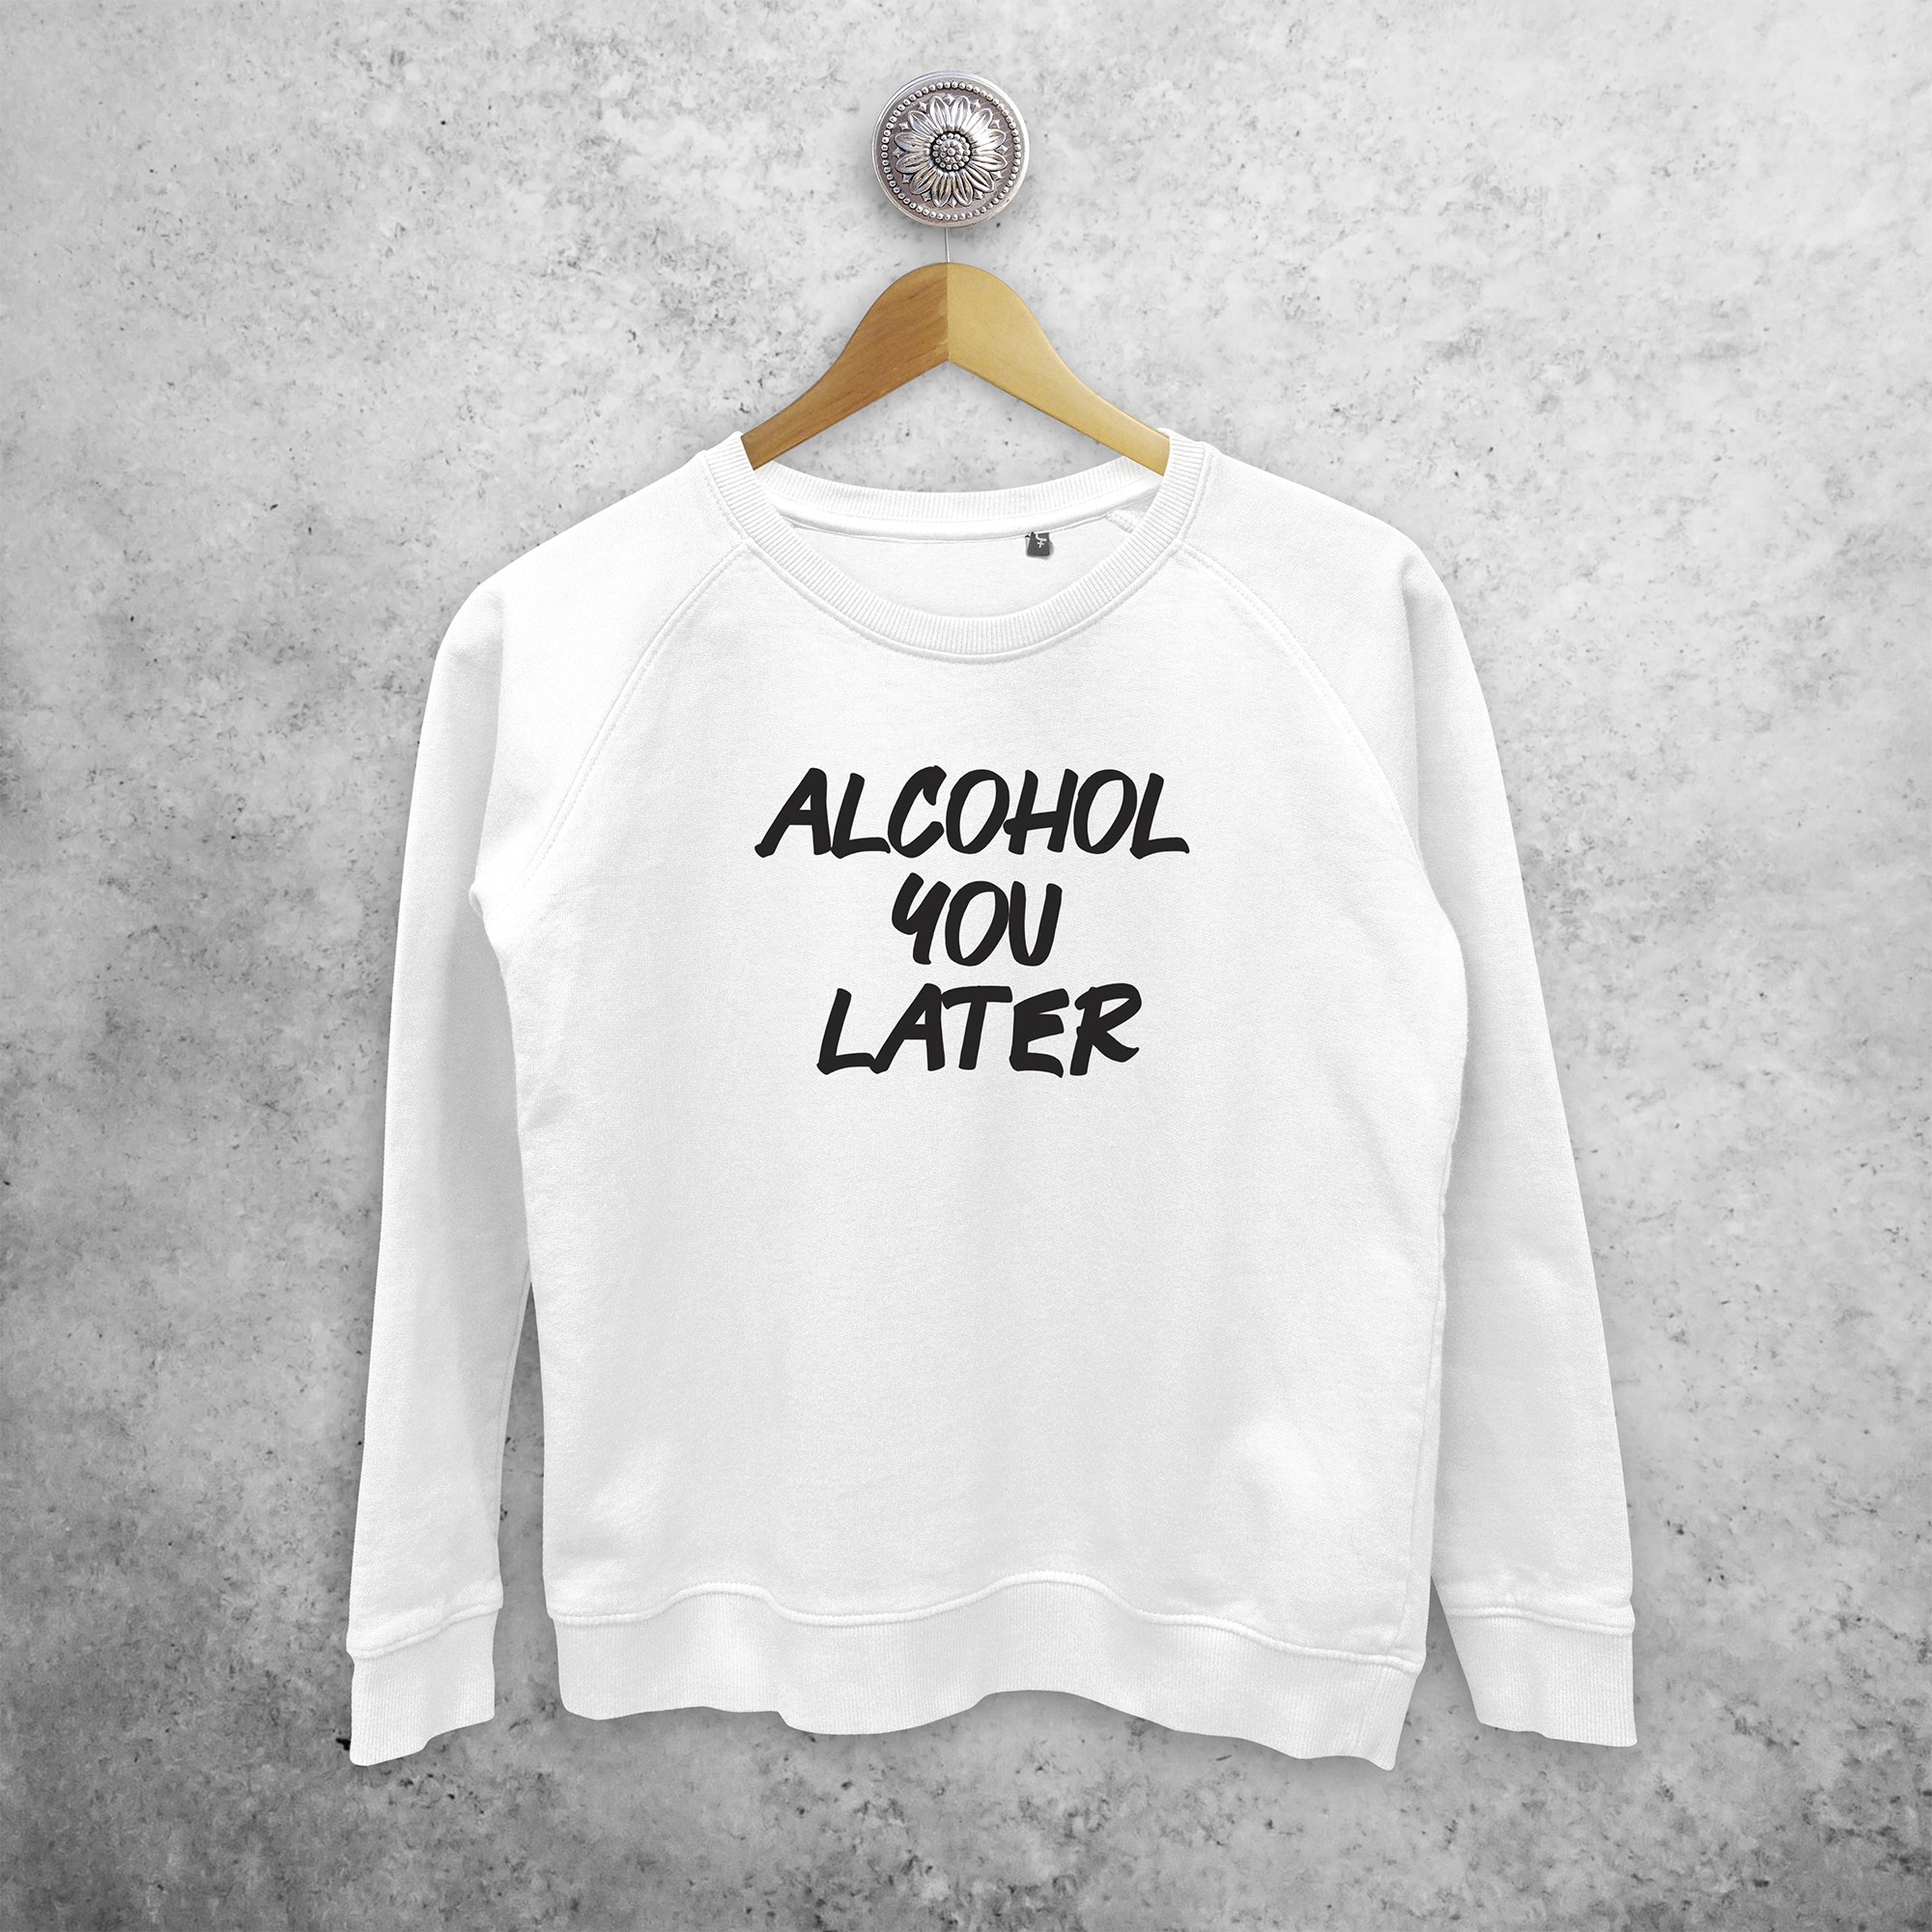 'Alcohol you later' sweater